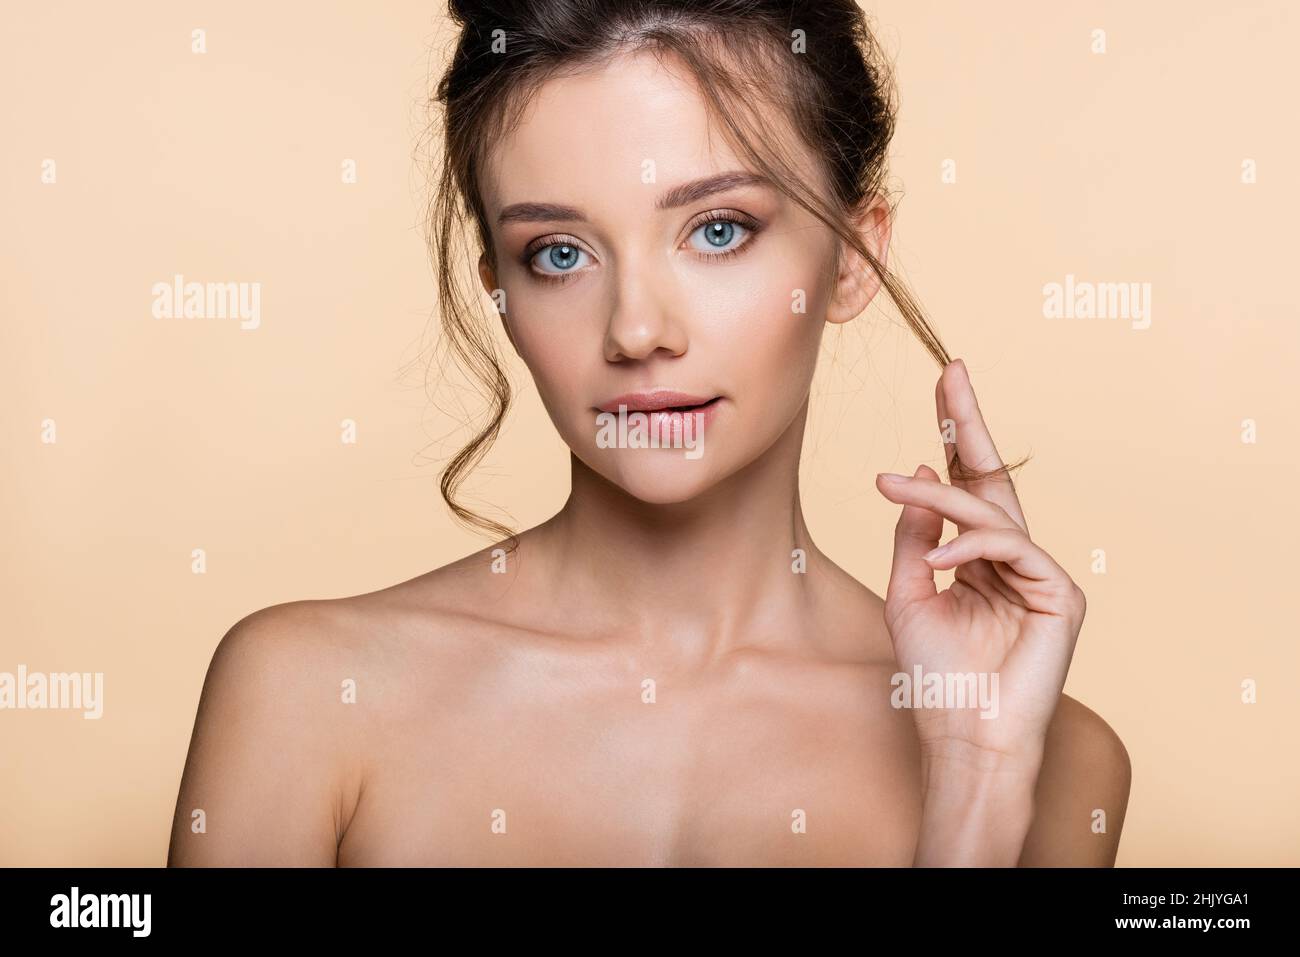 Pretty model touching hair and biting lip isolated on beige Stock Photo